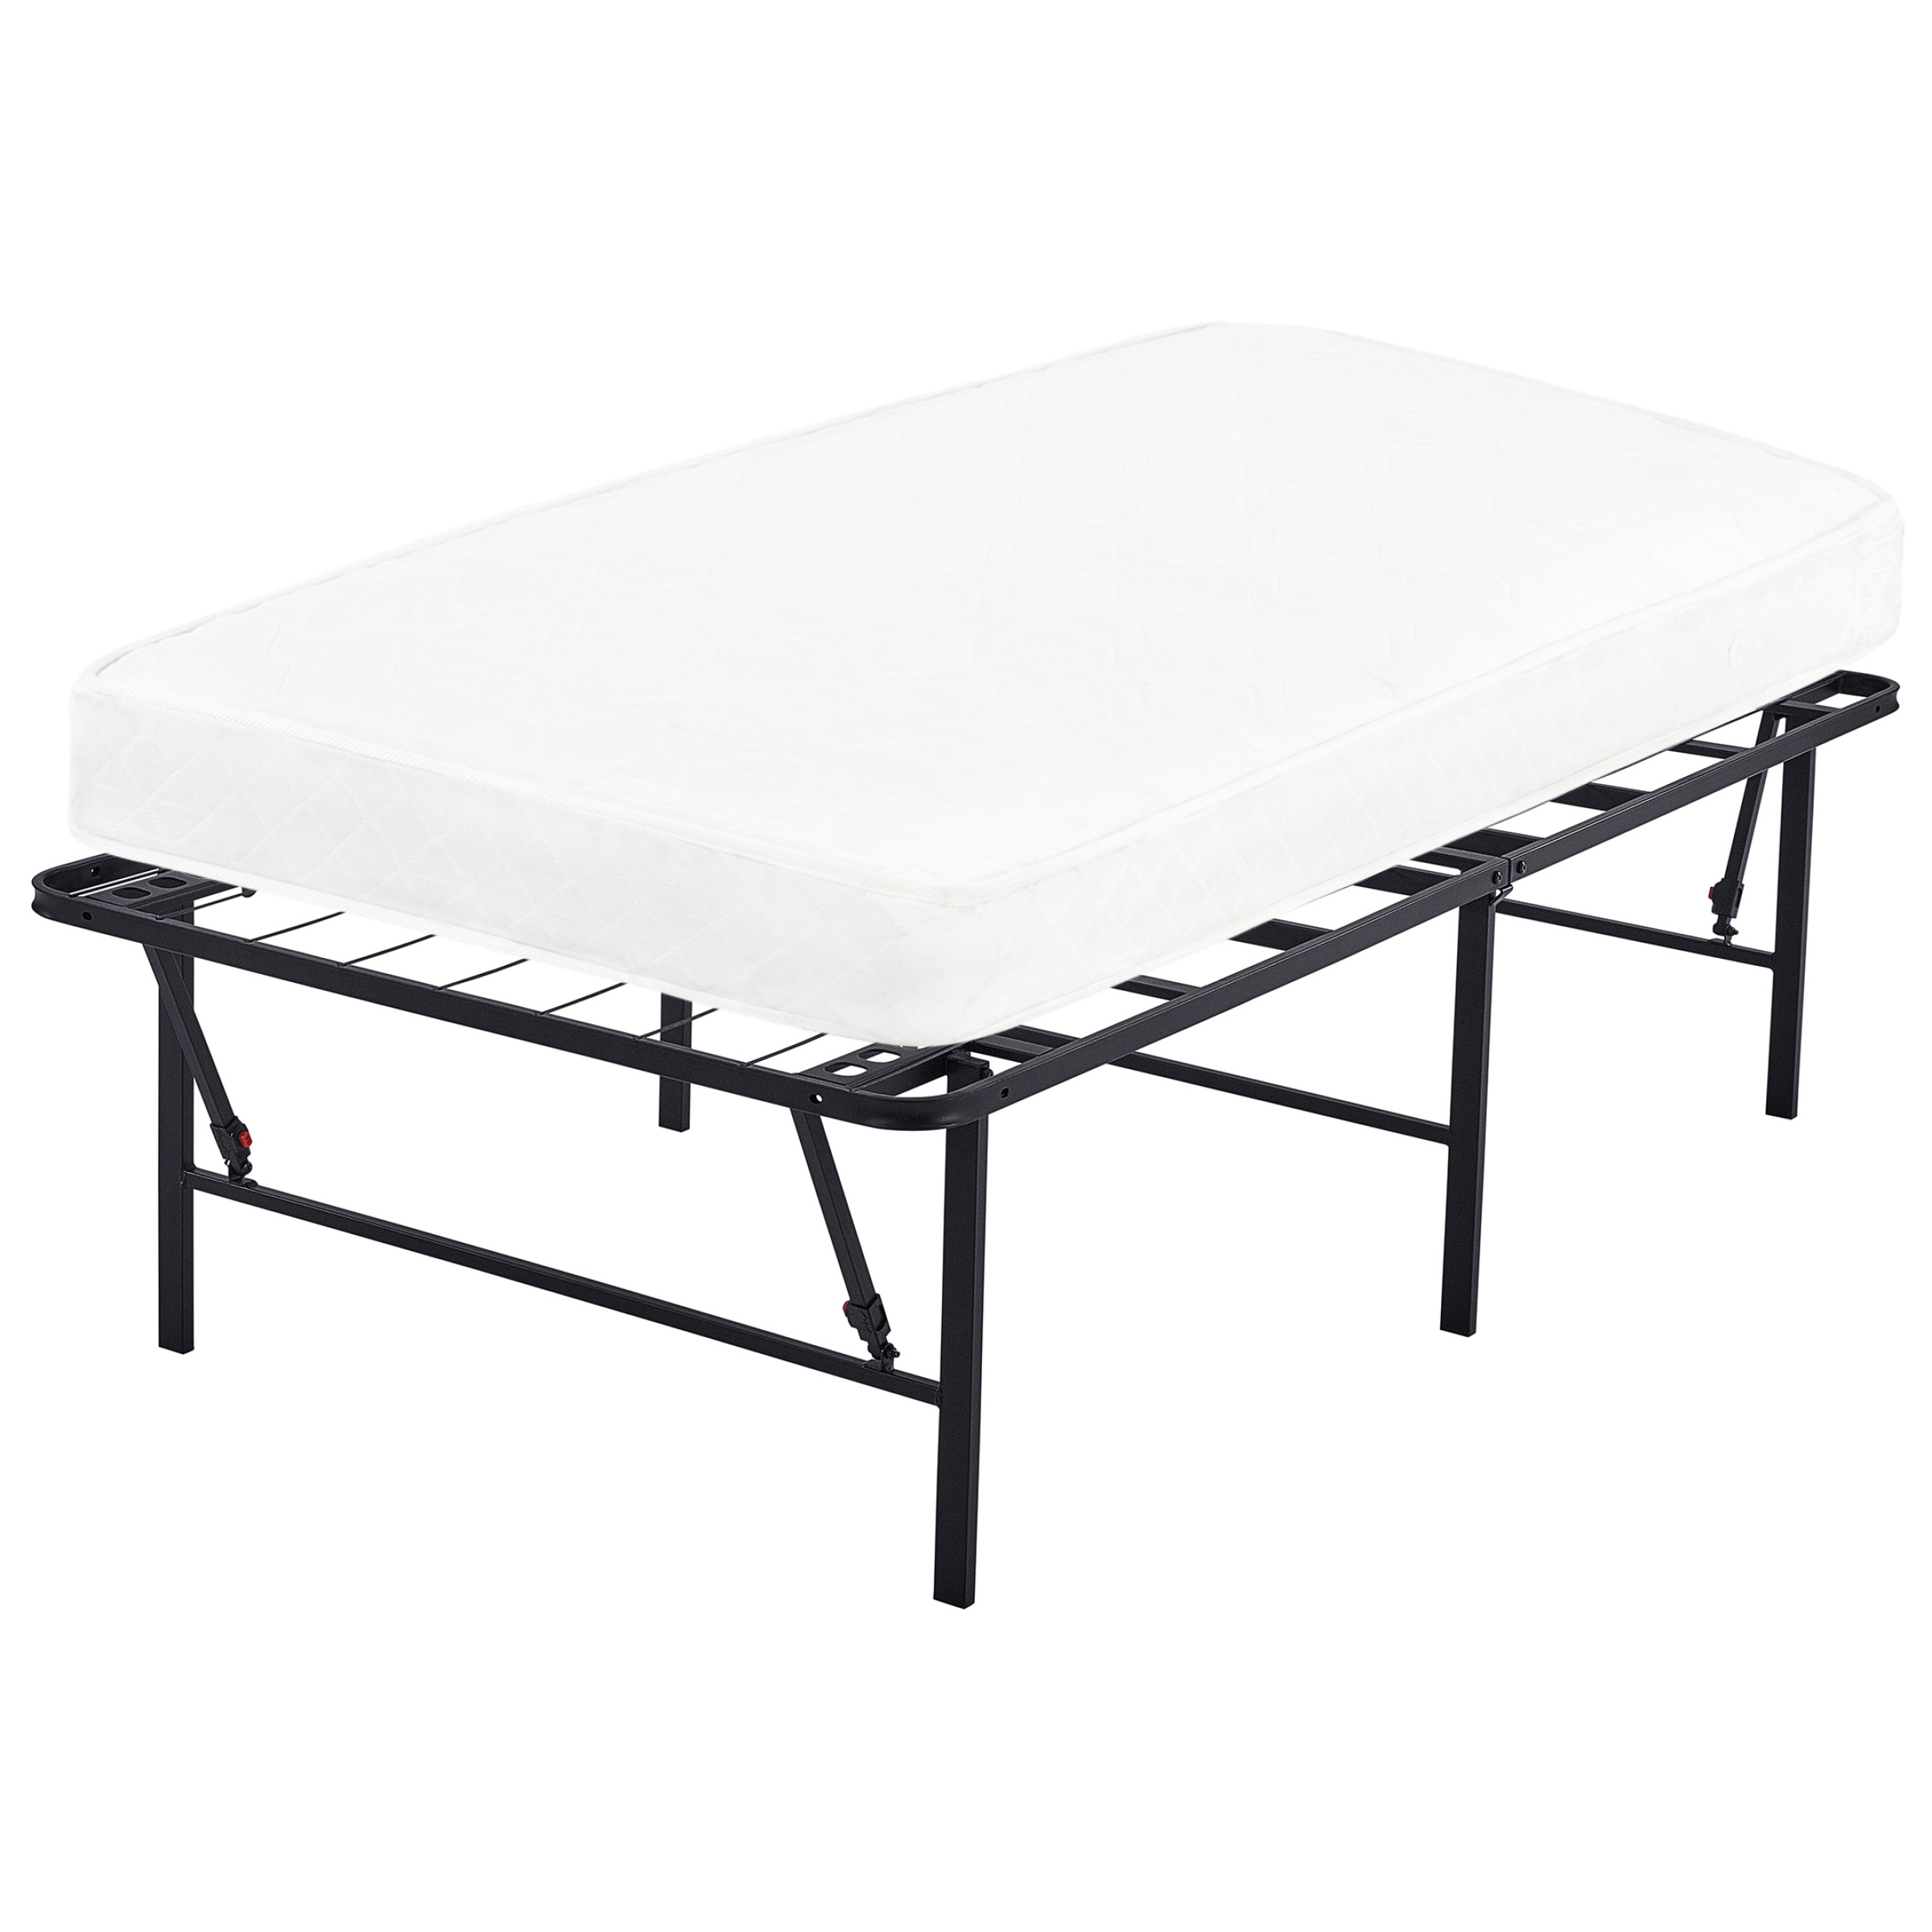 Mainstays 18 High Profile Foldable, Mainstays High Profile Foldable Steel Bed Frame